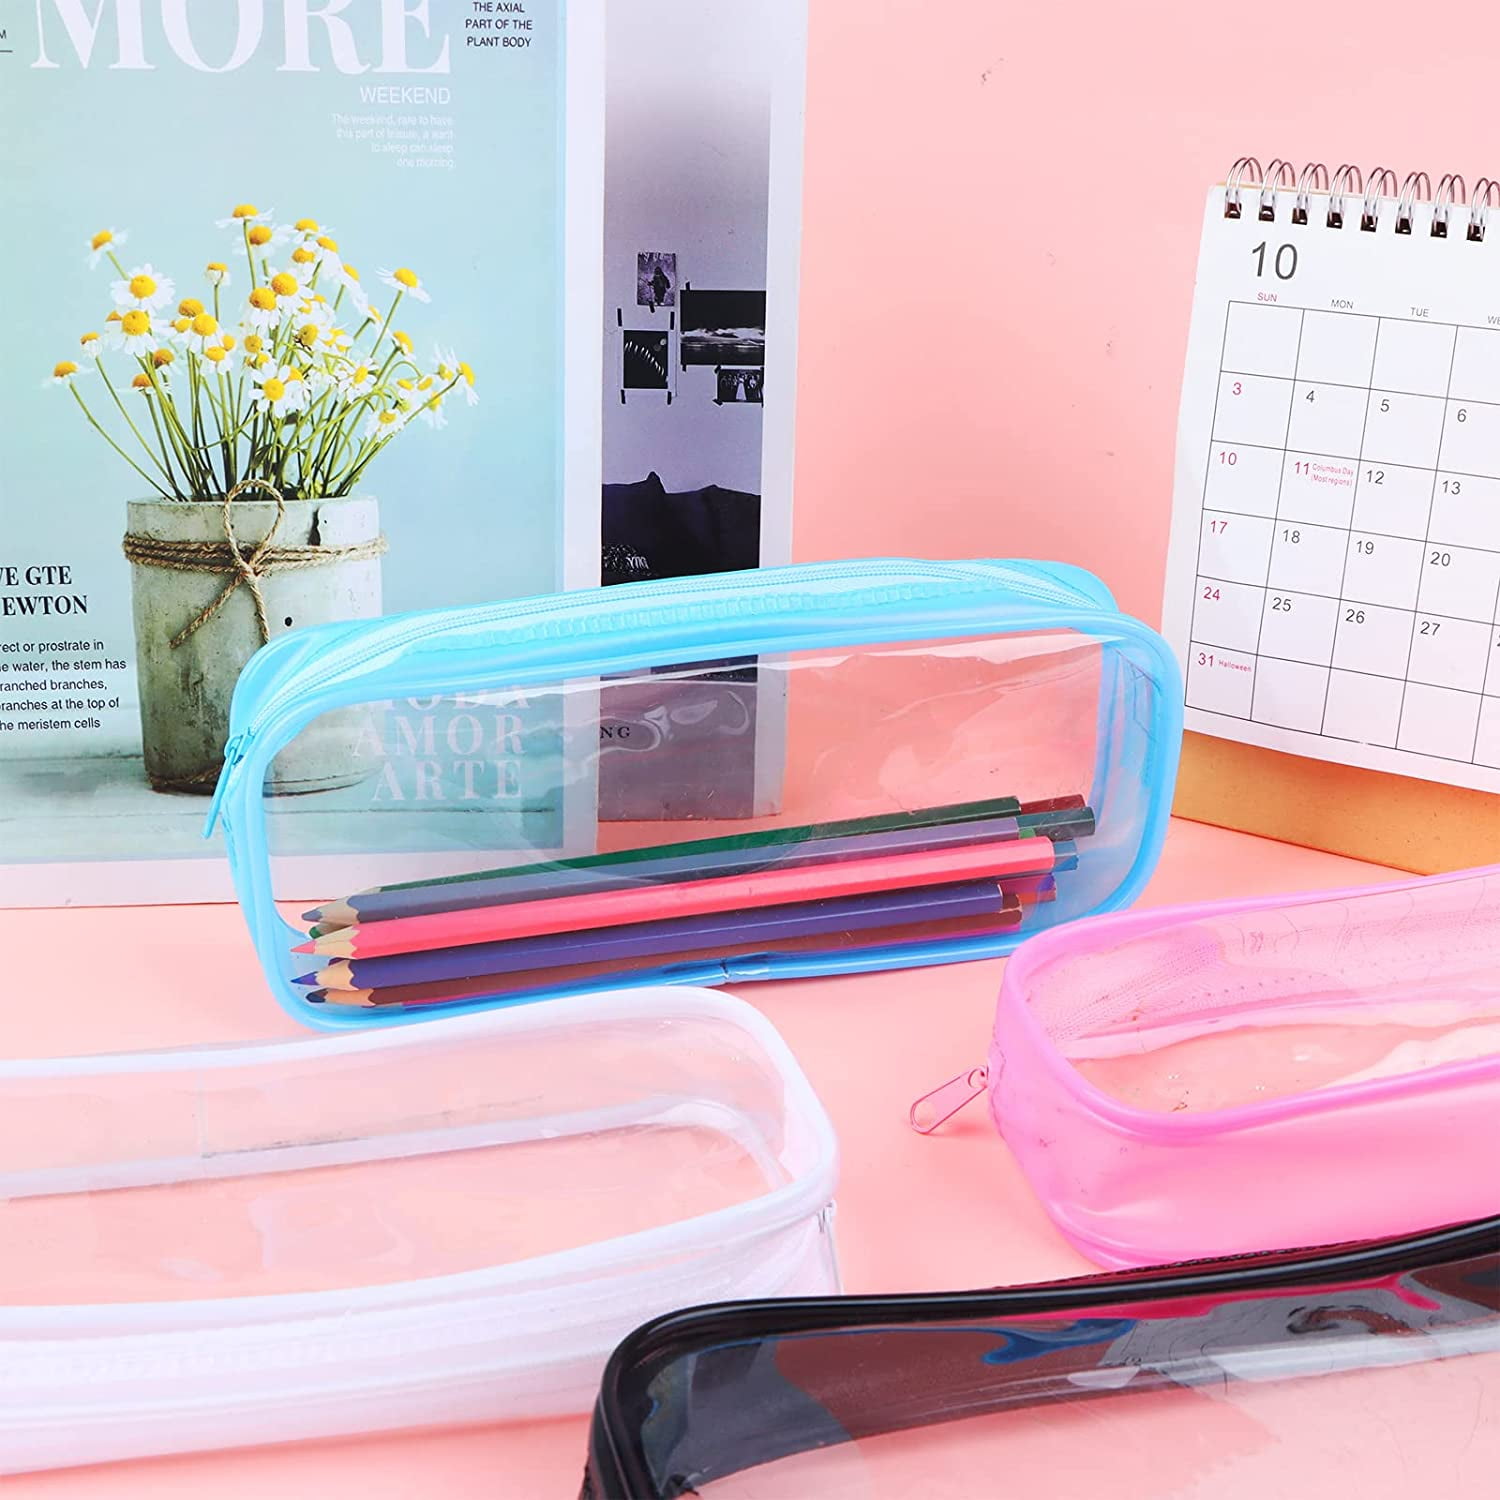  WUWEOT 10 Pack Clear Pencil Case, PVC Pencil Bag Makeup Pouch,  Big Capacity Travel Toiletry Bag with Zipper for Office Stationery and  Travel Storage (Black+White) : Arts, Crafts & Sewing